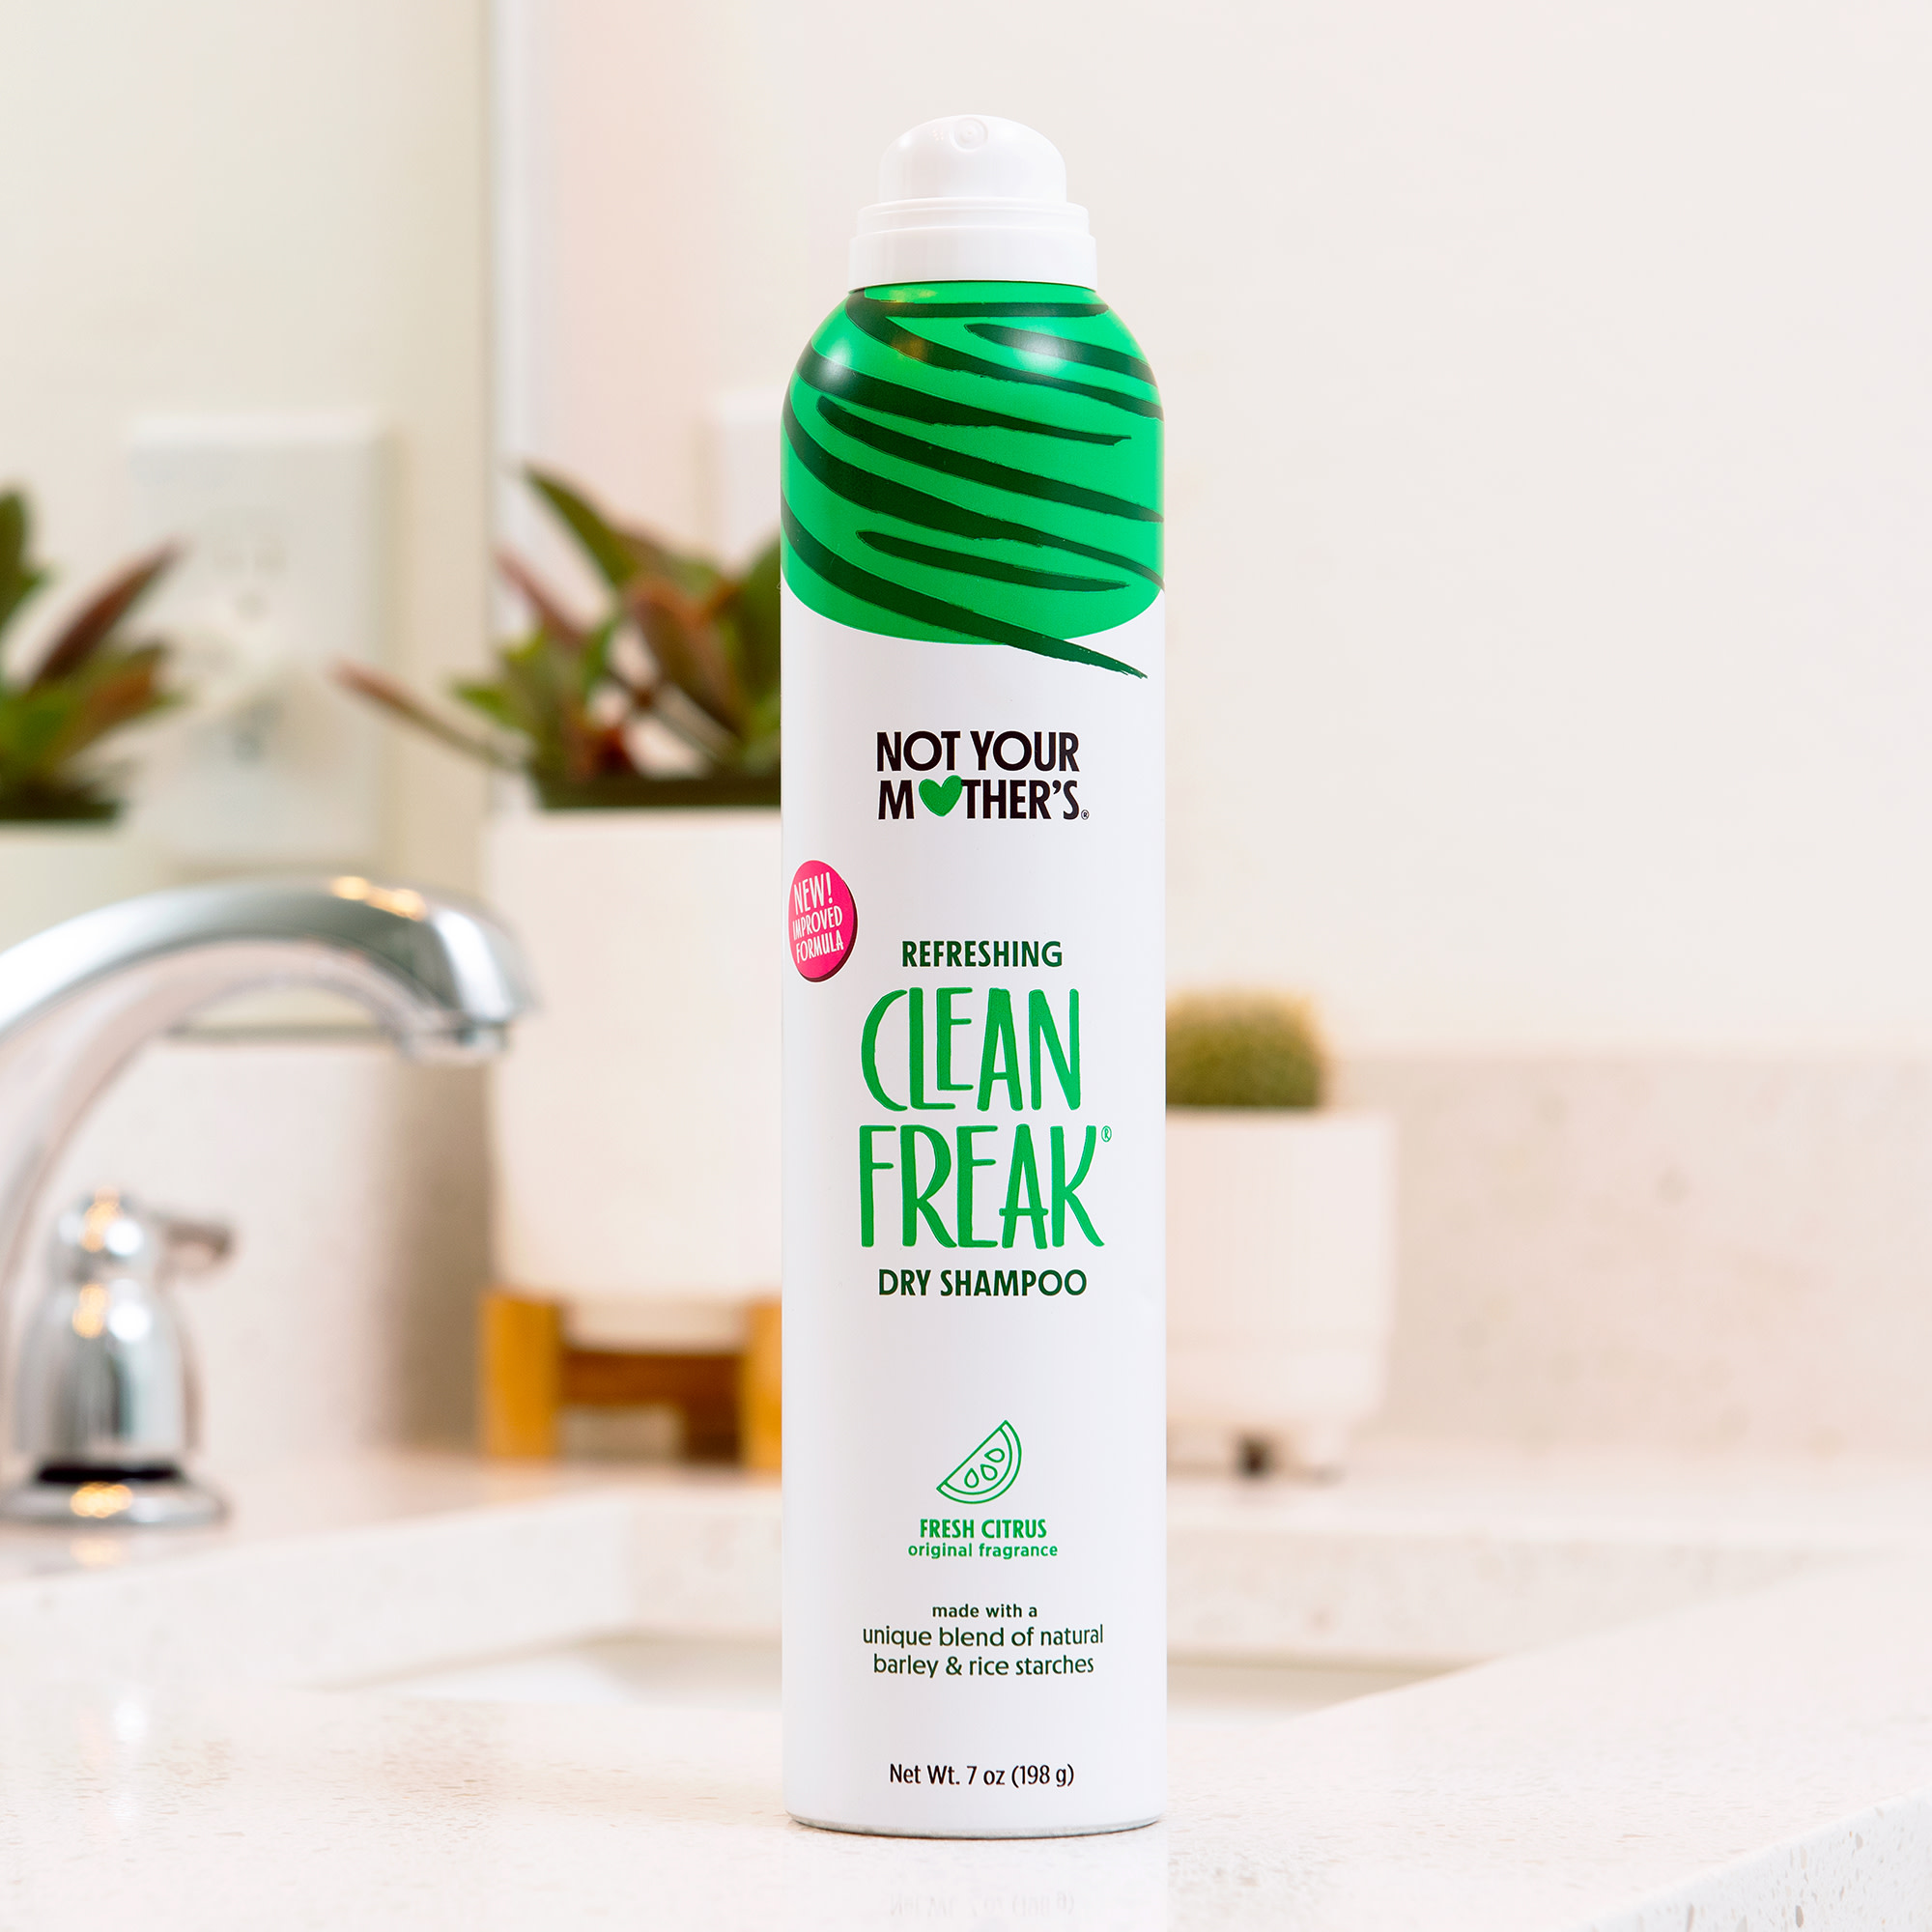 Not Your Mother's Clean Freak Refreshing Dry Shampoo, 7 oz - image 5 of 10